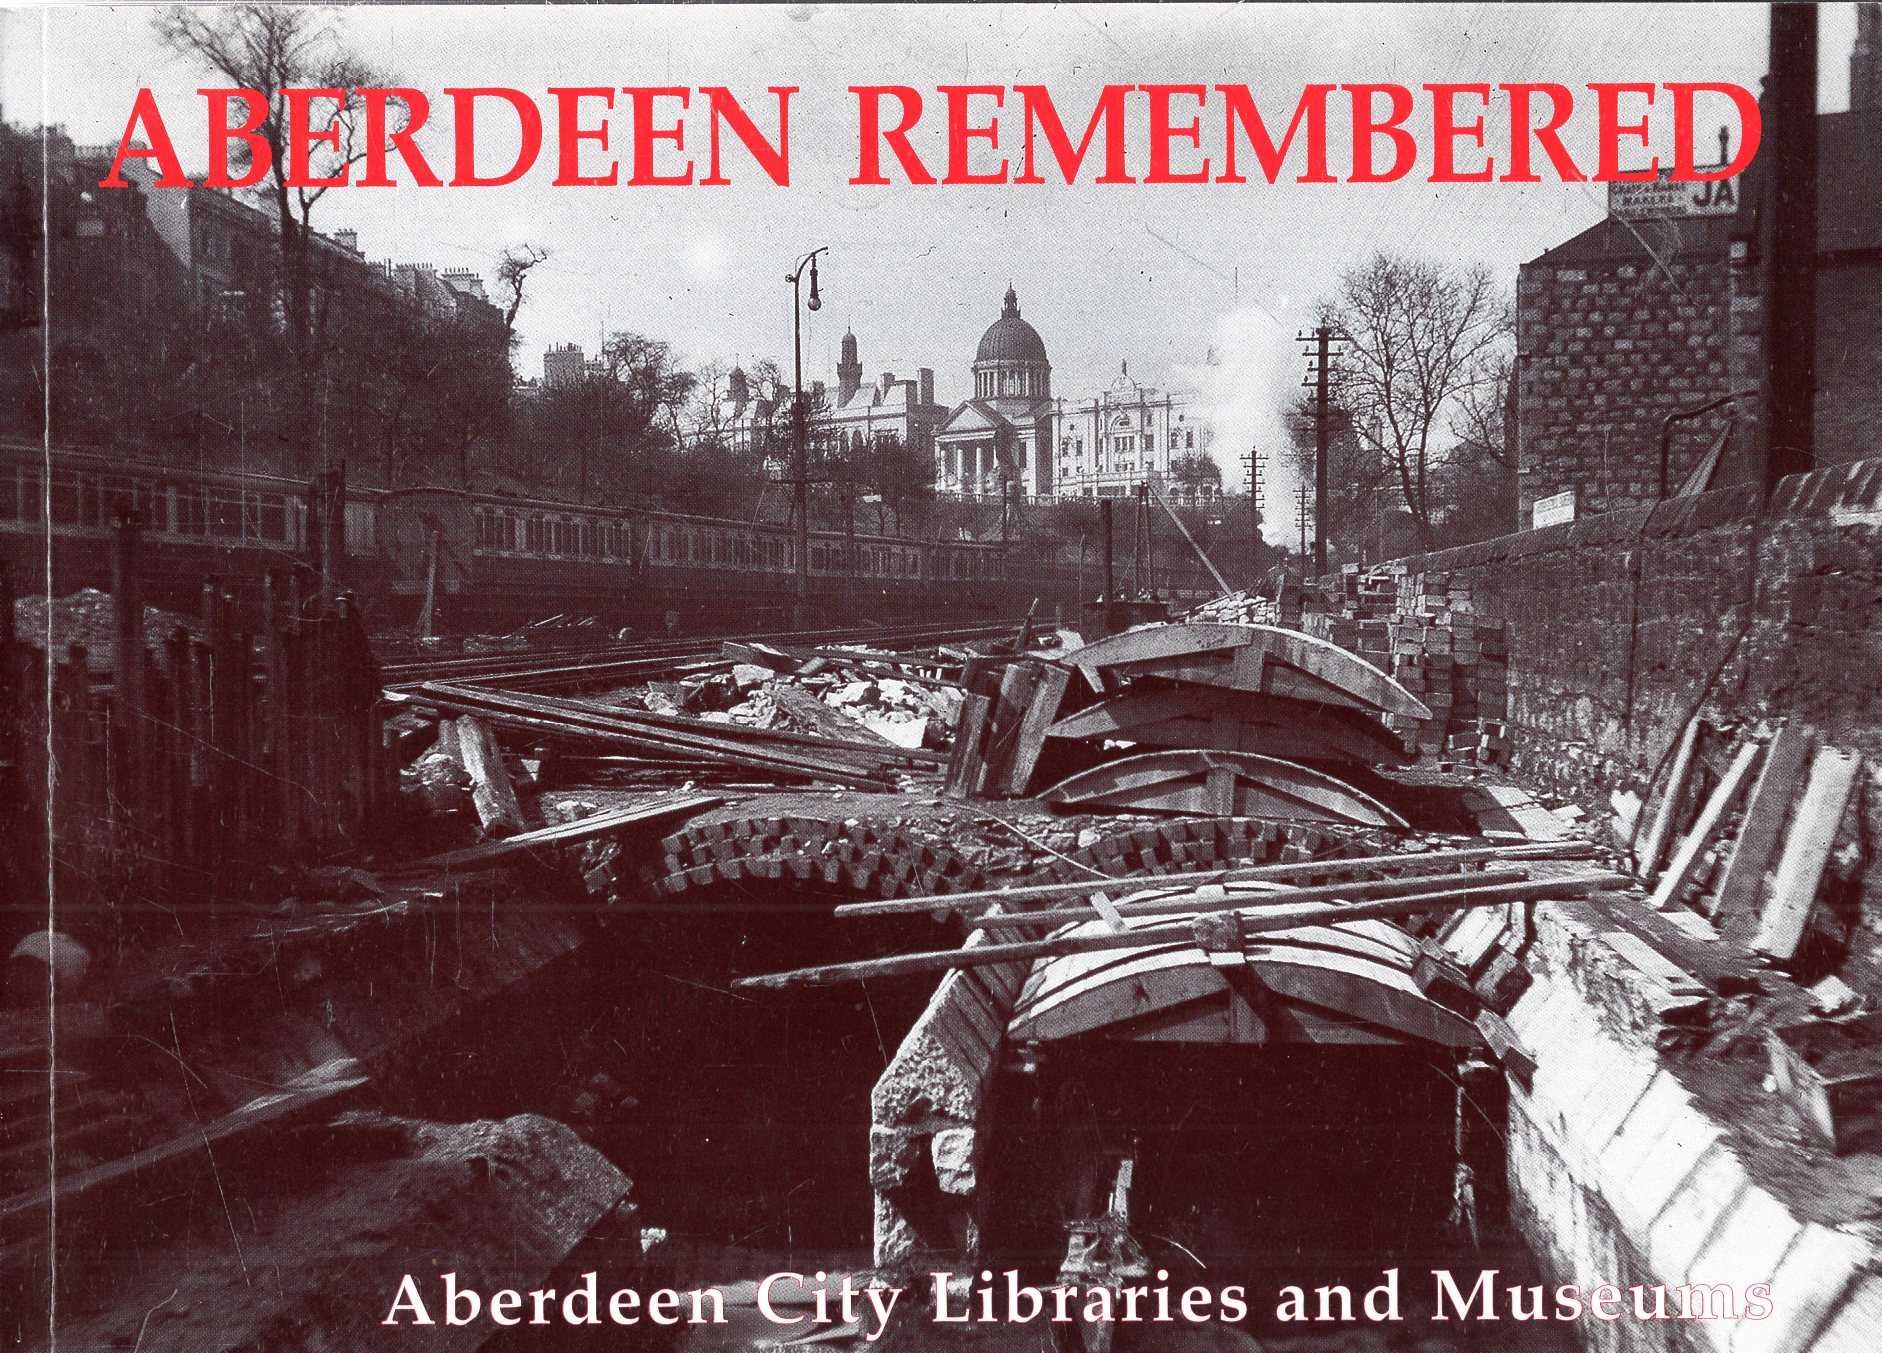 Image for Aberdeen Remembered by Aberdeen City Libraries and Museums